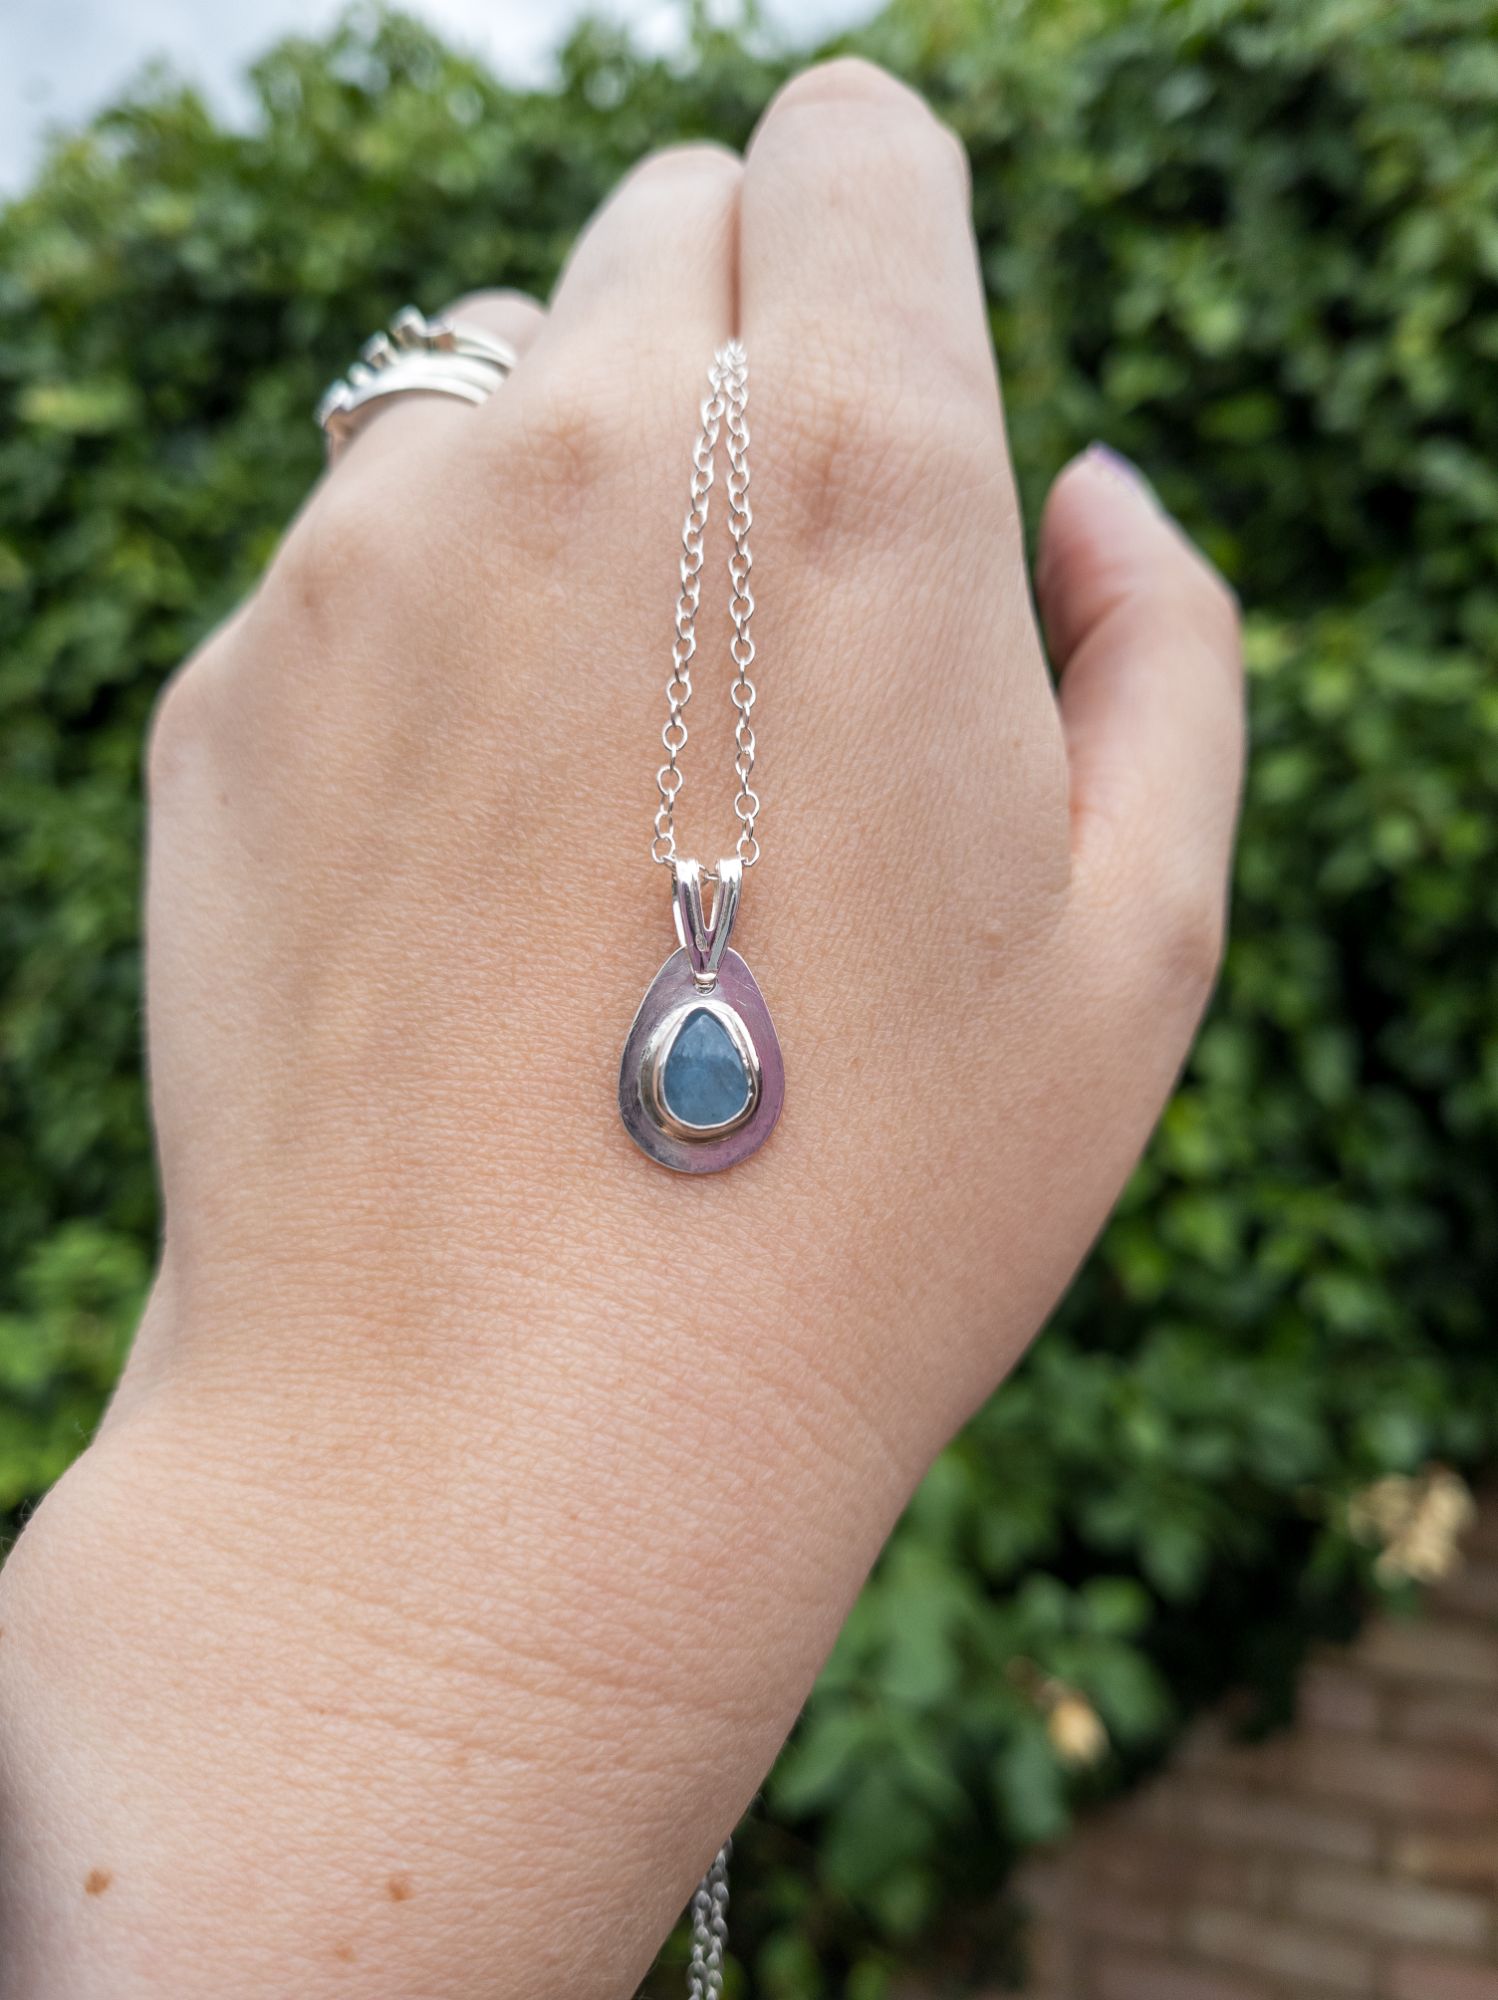 A beautiful pear shaped aqua blue quartz gemstone set in a handmade sterling silver bezel,  a perfect little gem of colour to add to yur collection